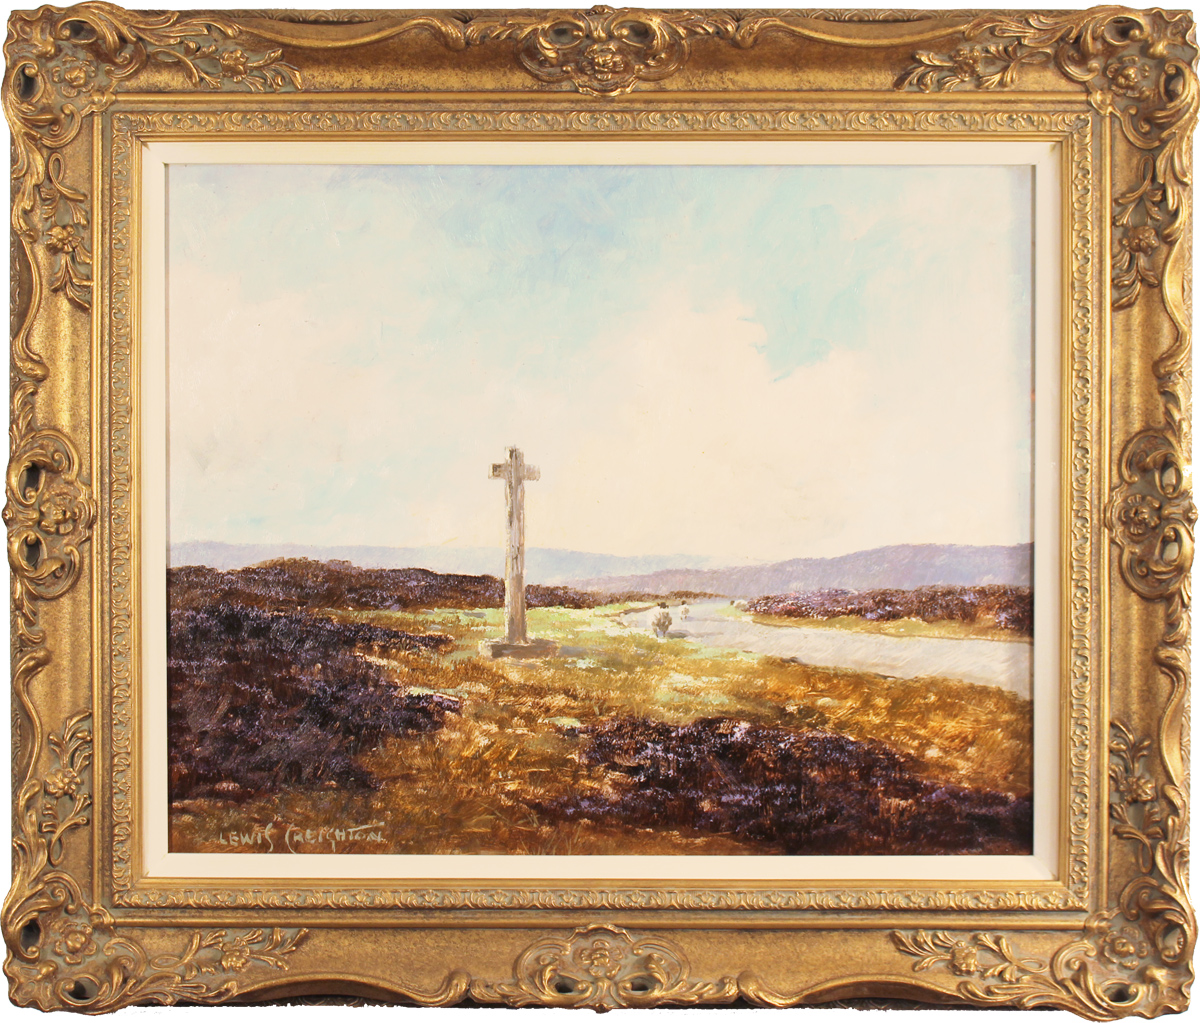 Lewis Creighton, Original oil painting on panel, Young Ralph's Cross, North Yorkshire, click to enlarge